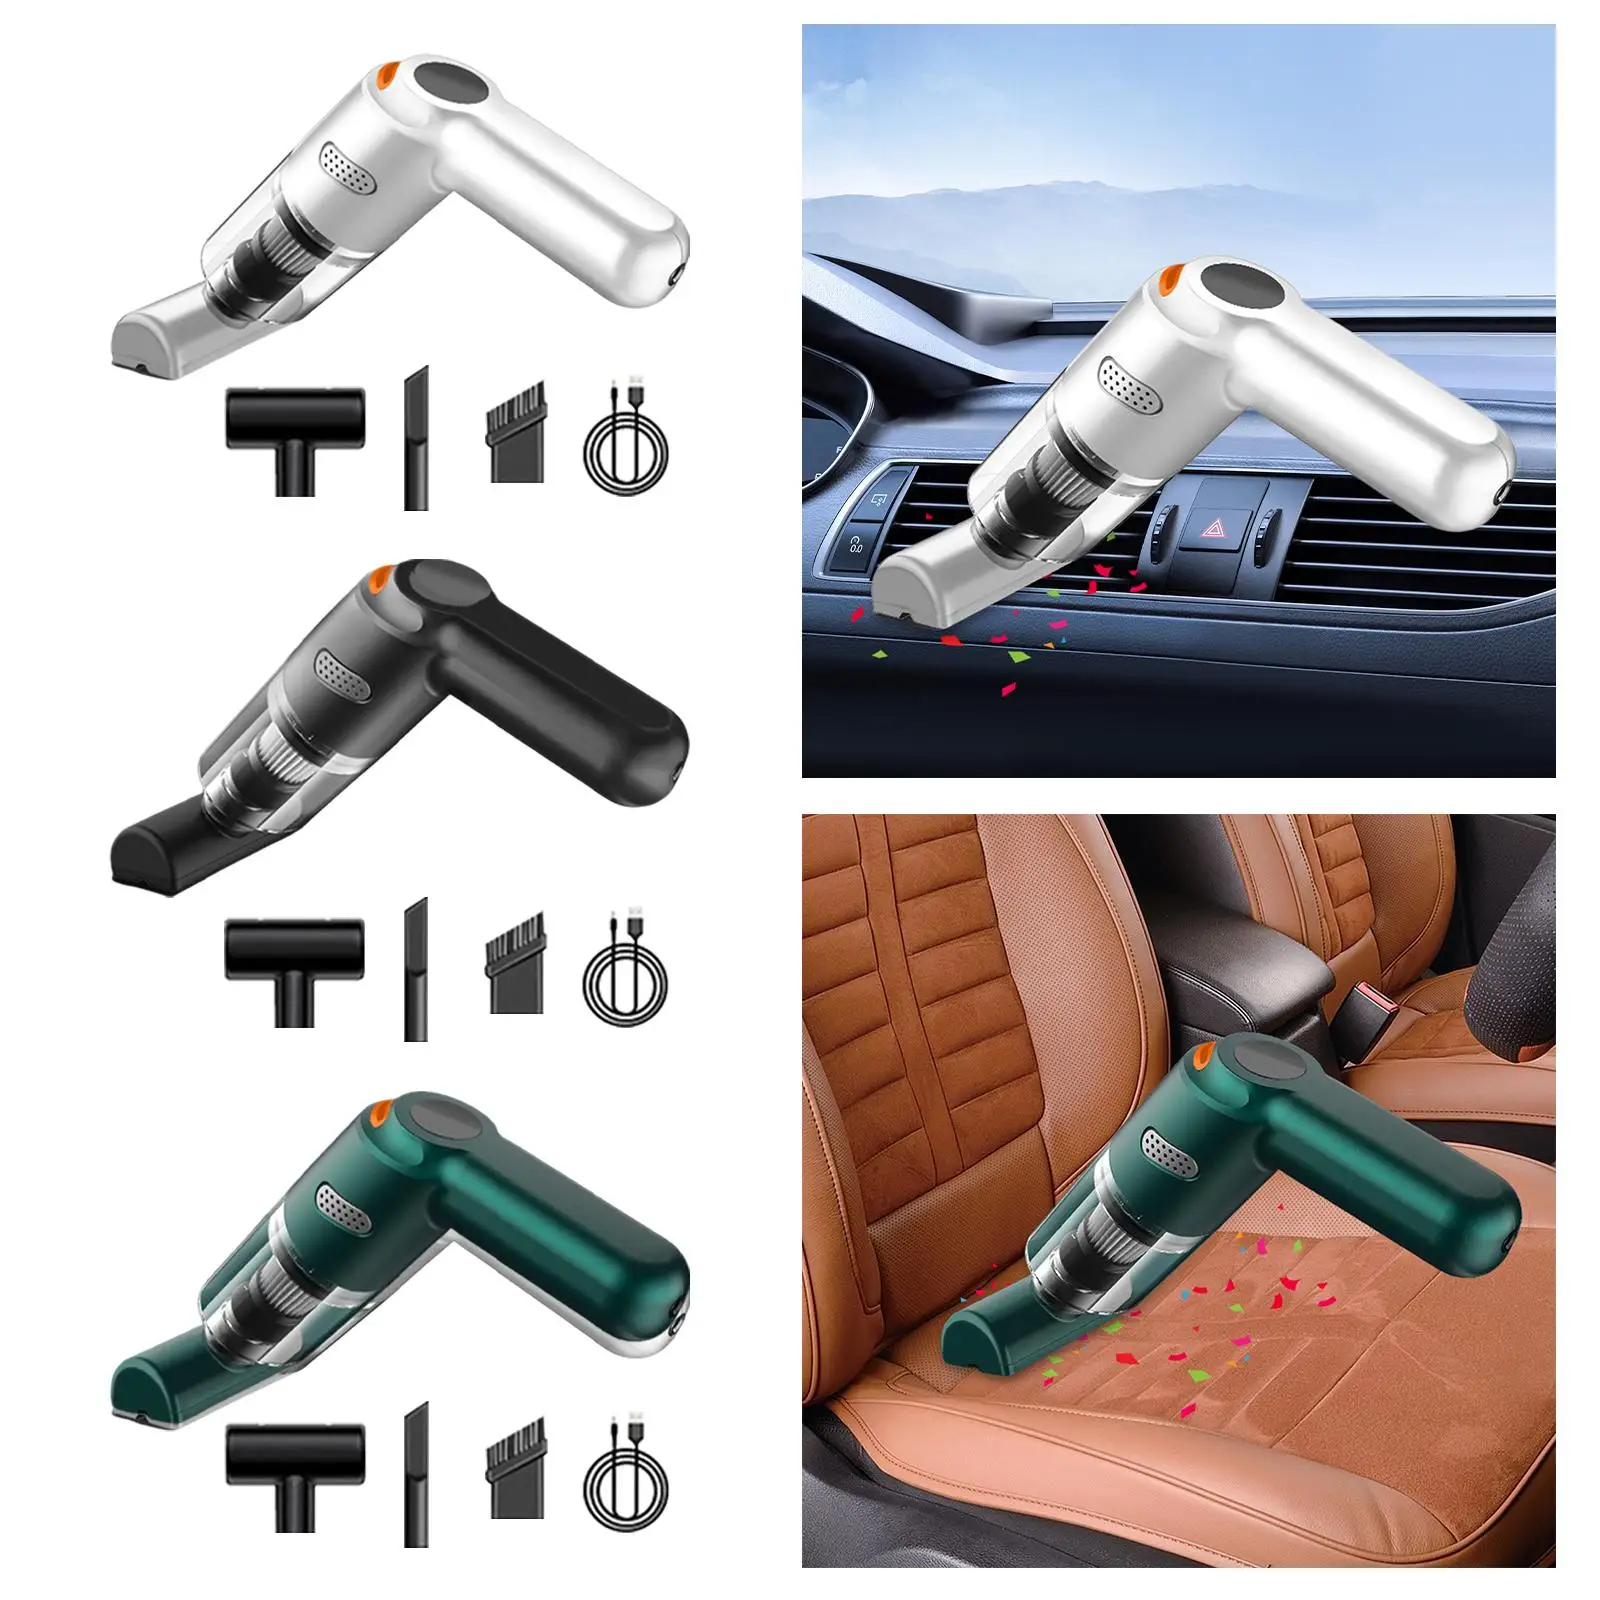 Mini Car Vacuum Cleaner High Power Suction Portable 120W Lightweight USB Charging for car home Paper Scraps PC Cleaning